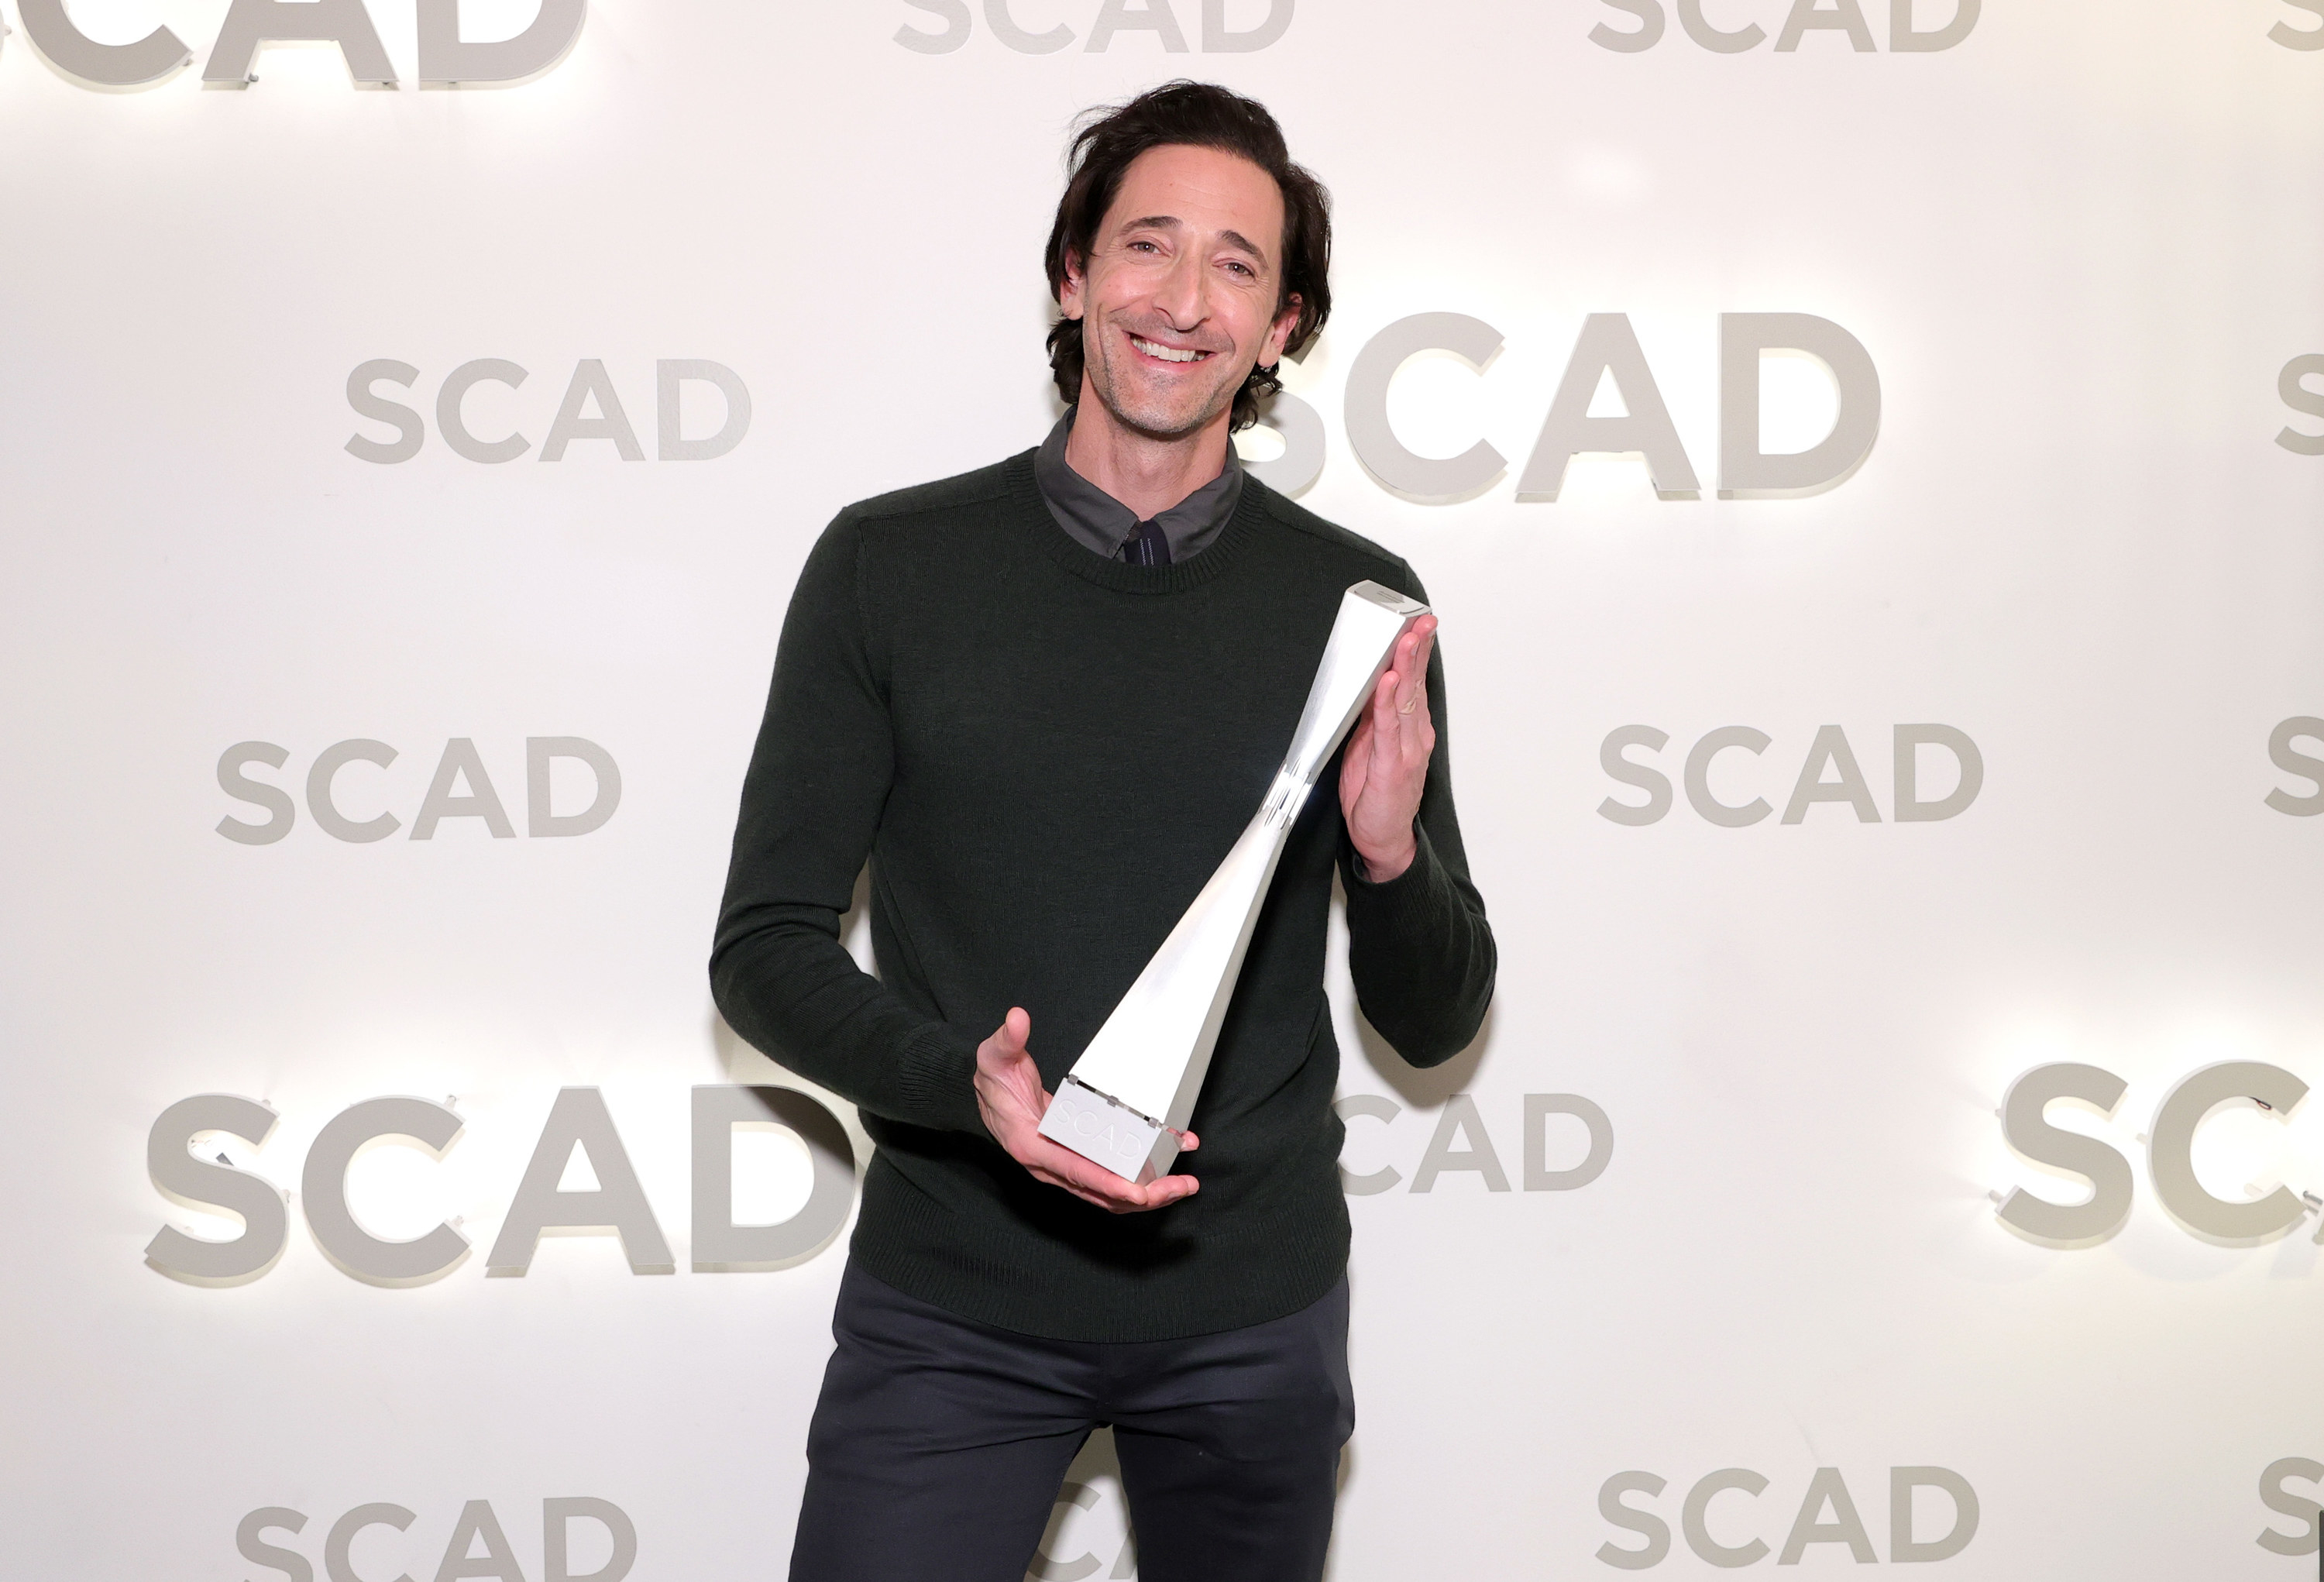 Brody holds an award